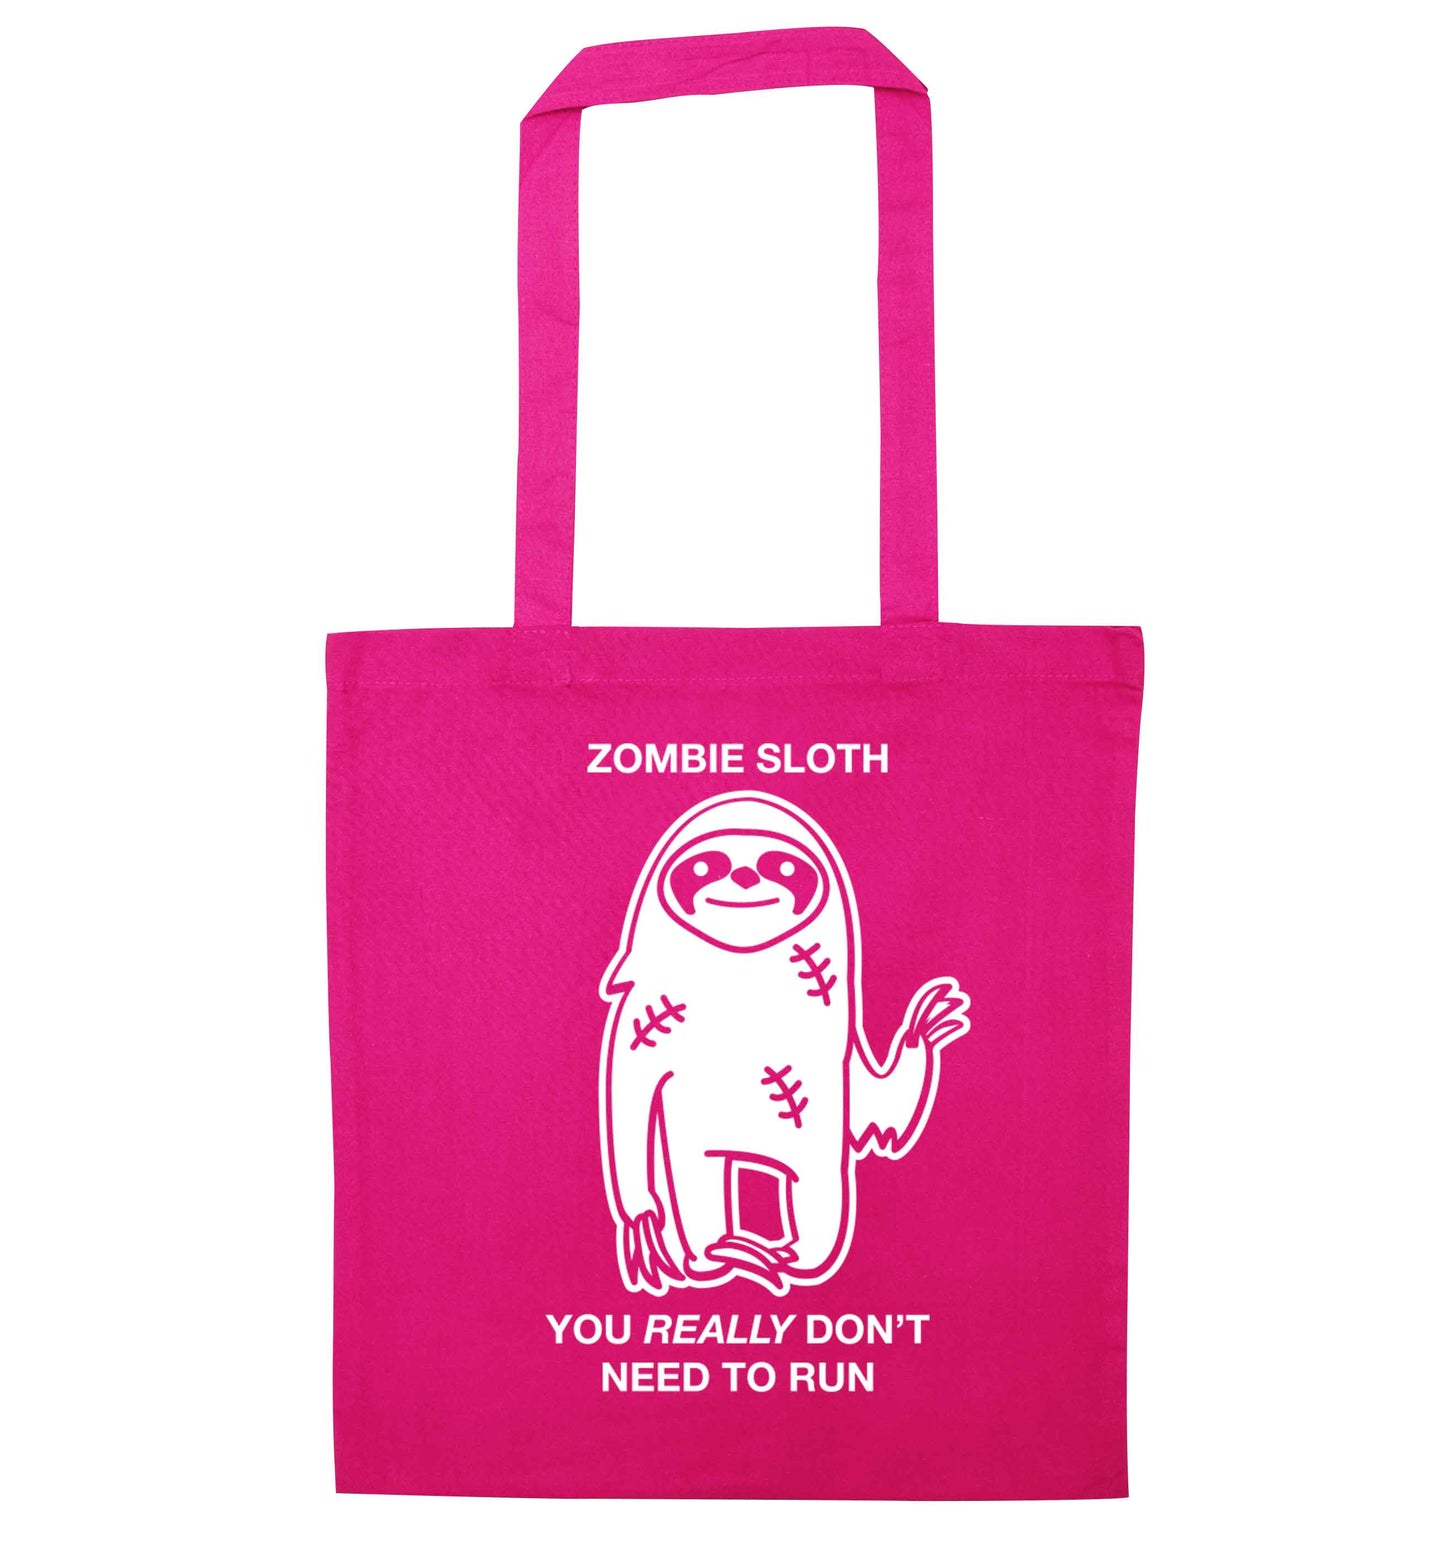 Zombie sloth you really don't need to run pink tote bag